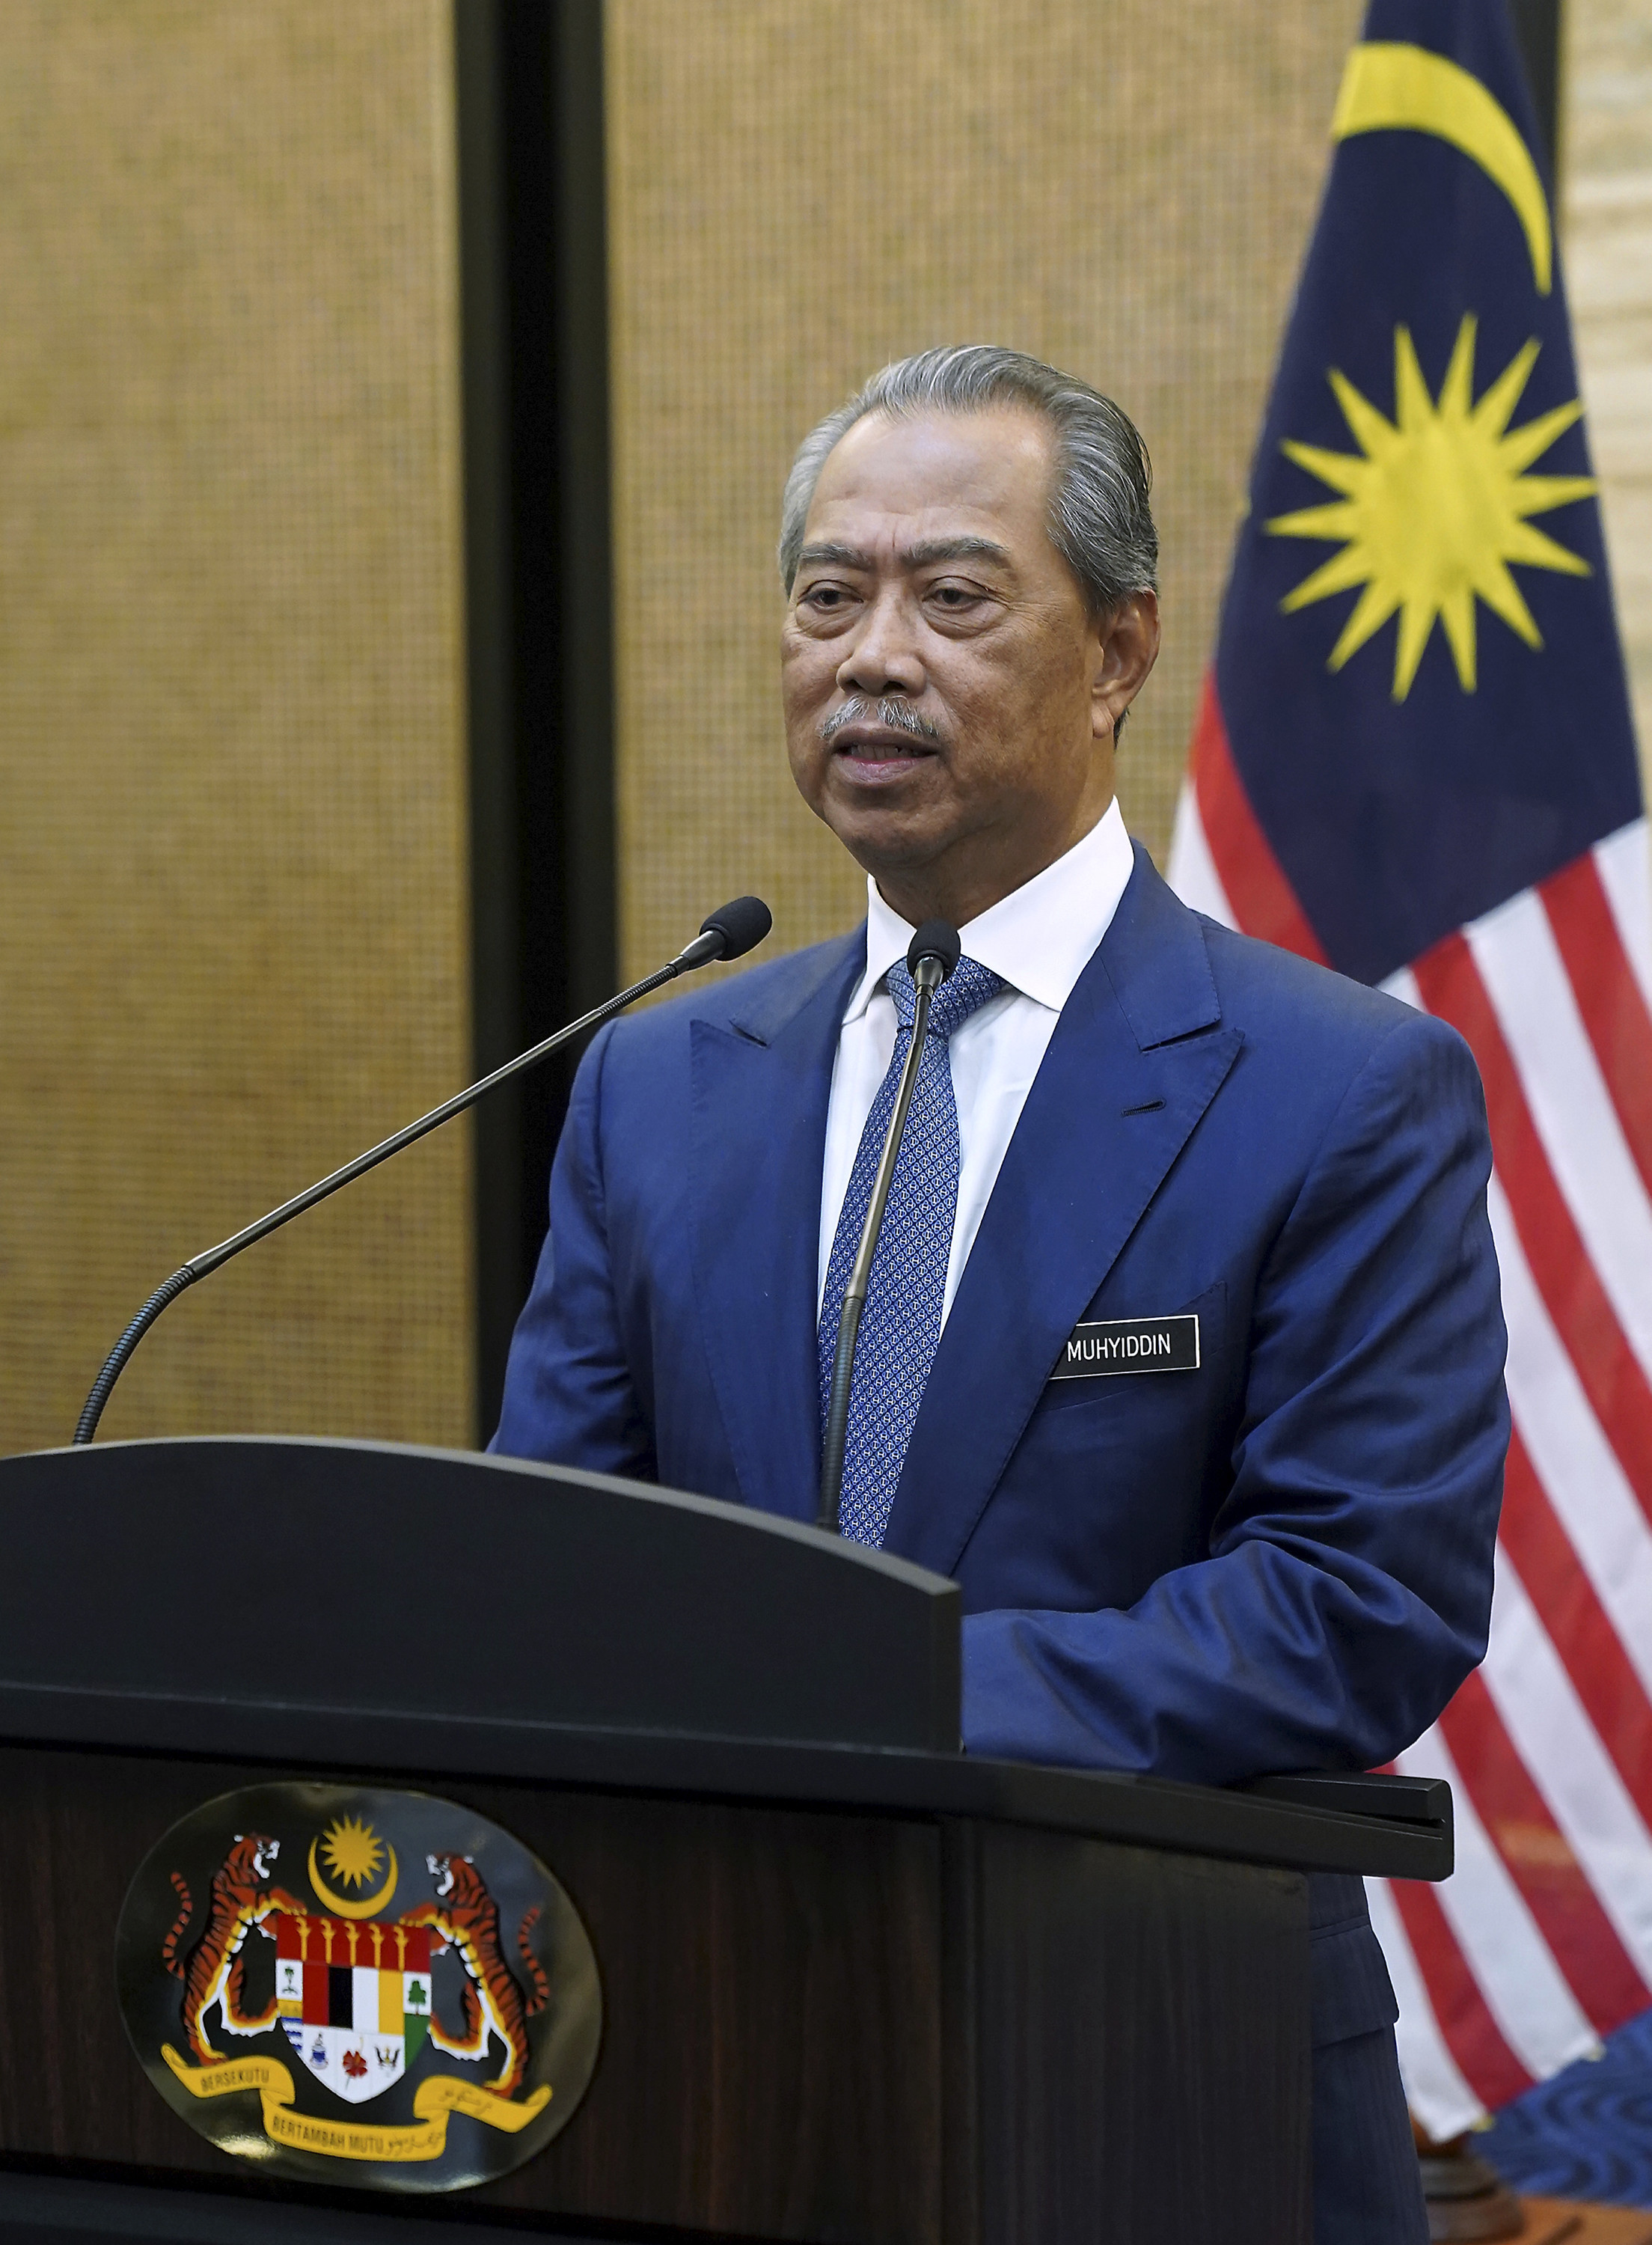 Muhyiddin’s Maiden Speech As 8th Malaysian PM Attracts Attention